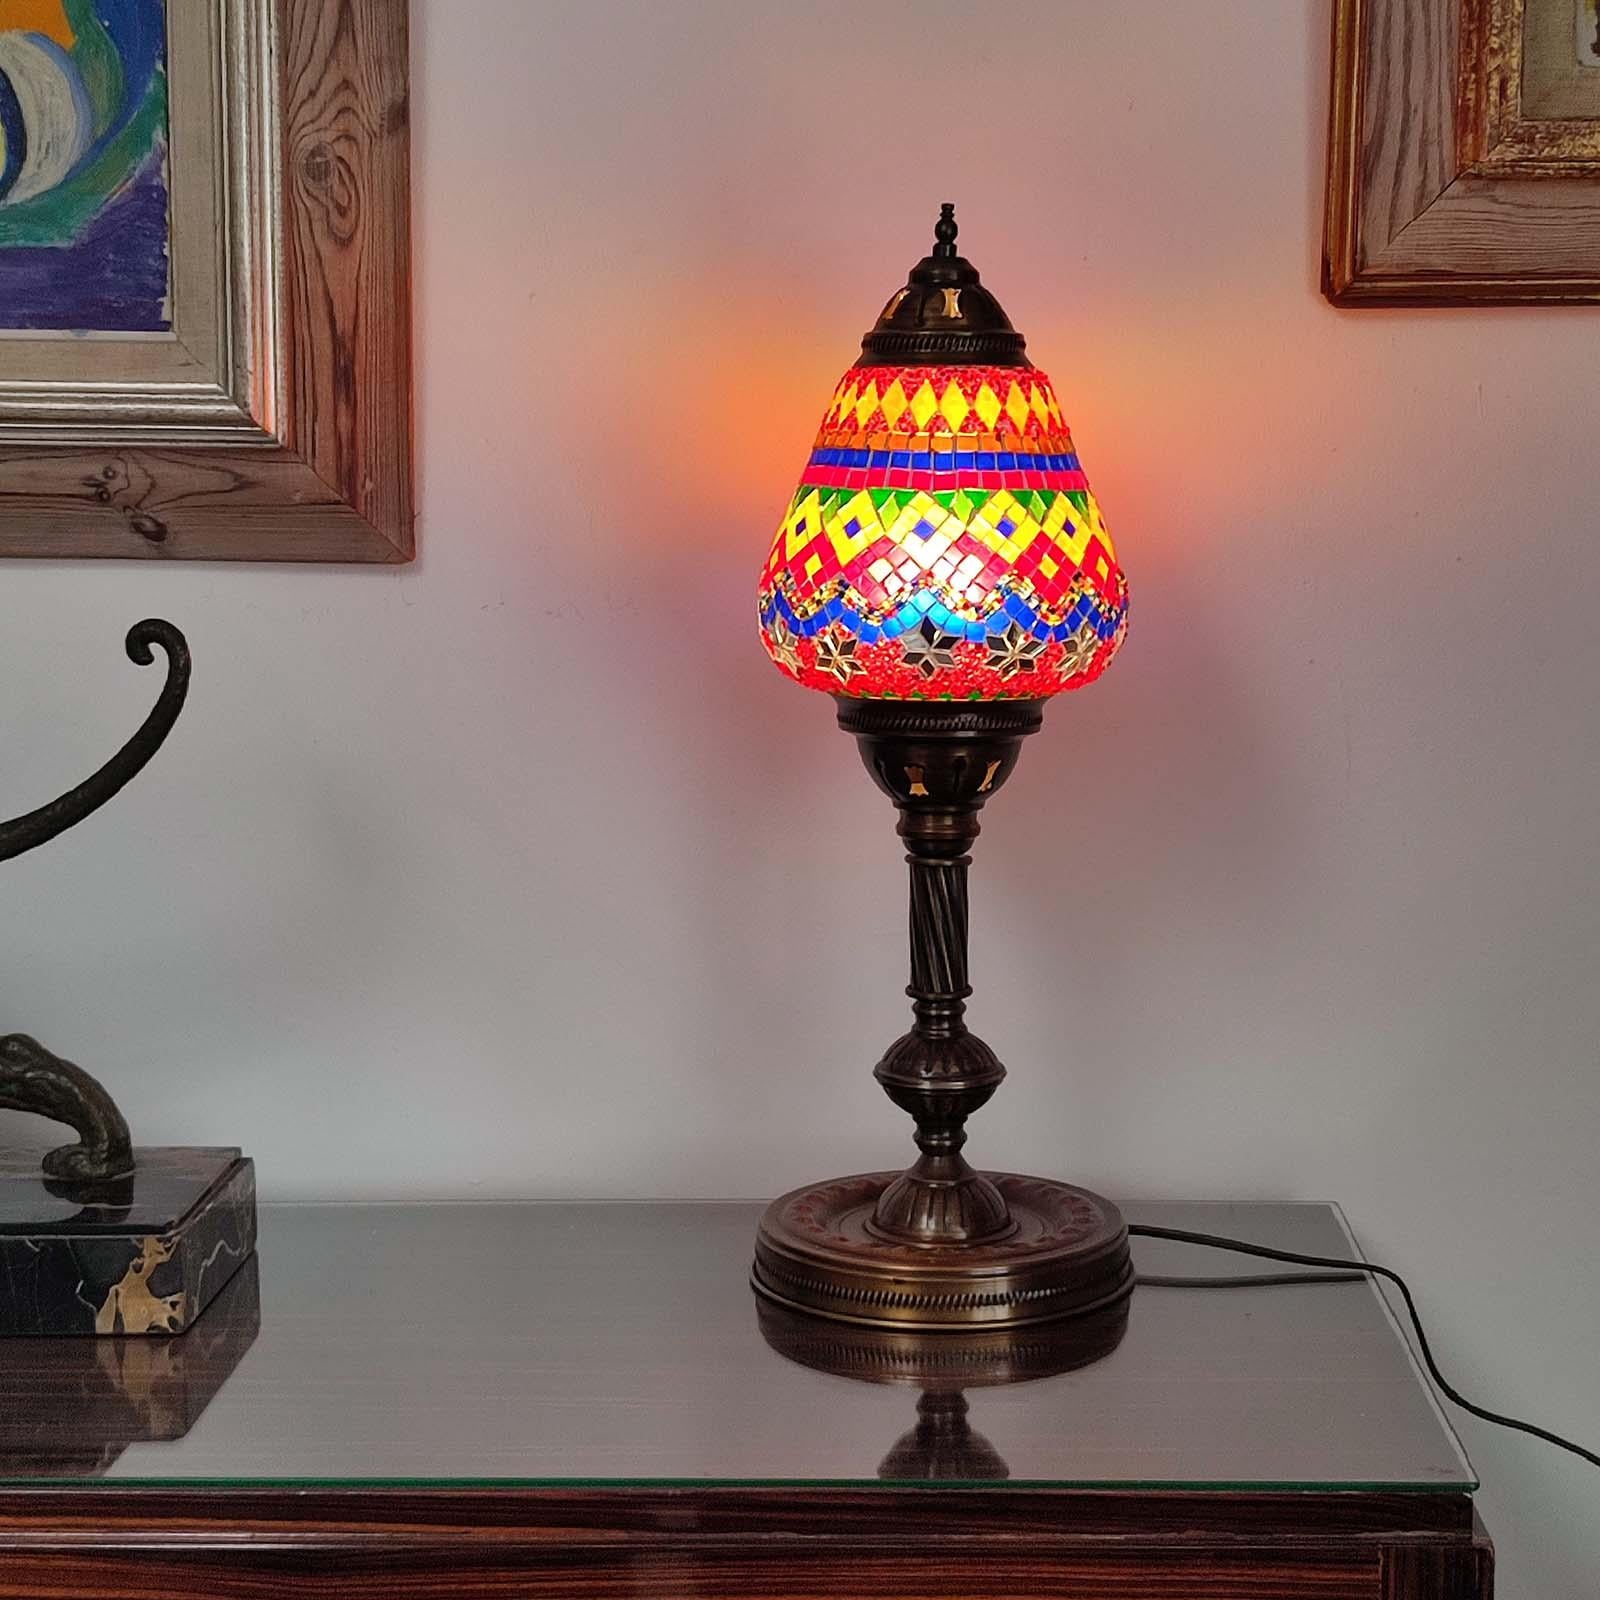 Wonderful vintage Moroccan mosaic table lamp, copper body with a glass shade made of mosaic glass, glass beads and mirror pieces. 1xE27 light bulb. Very good used condition, no damages.

Measurements: 56 cm height, 18,5 cm diameter.